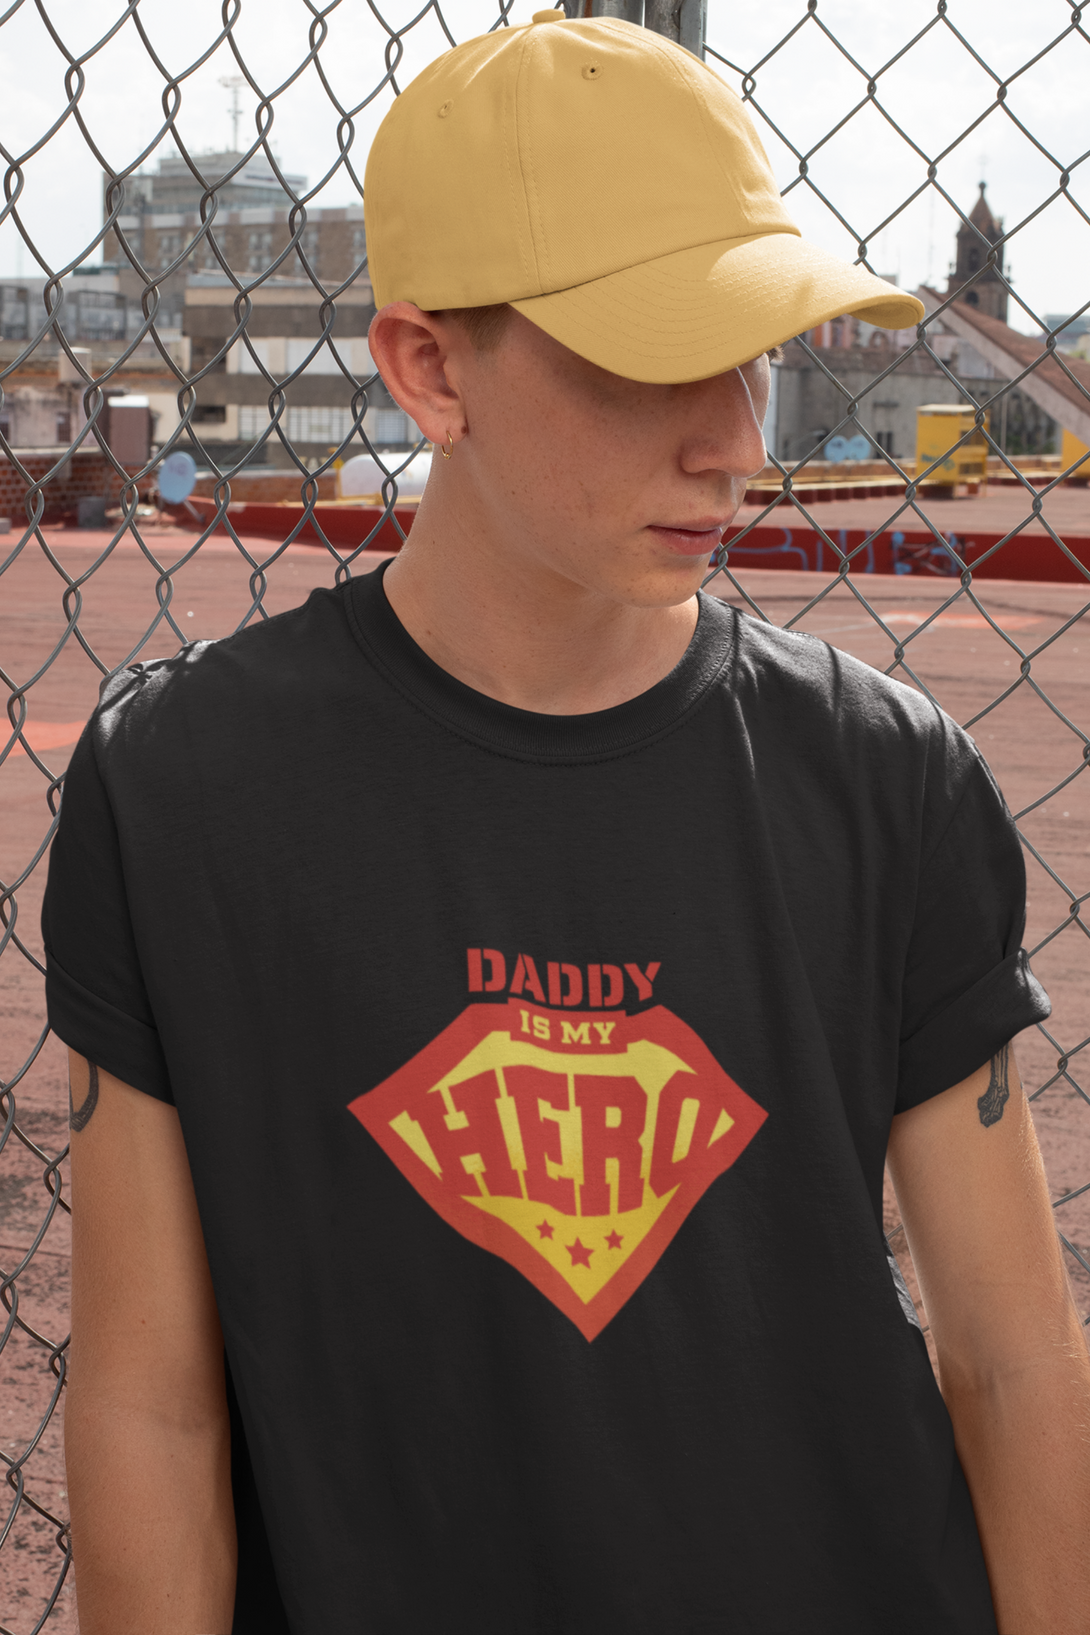 Daddy Is My Hero Printed T-Shirt For Men - WowWaves - 4